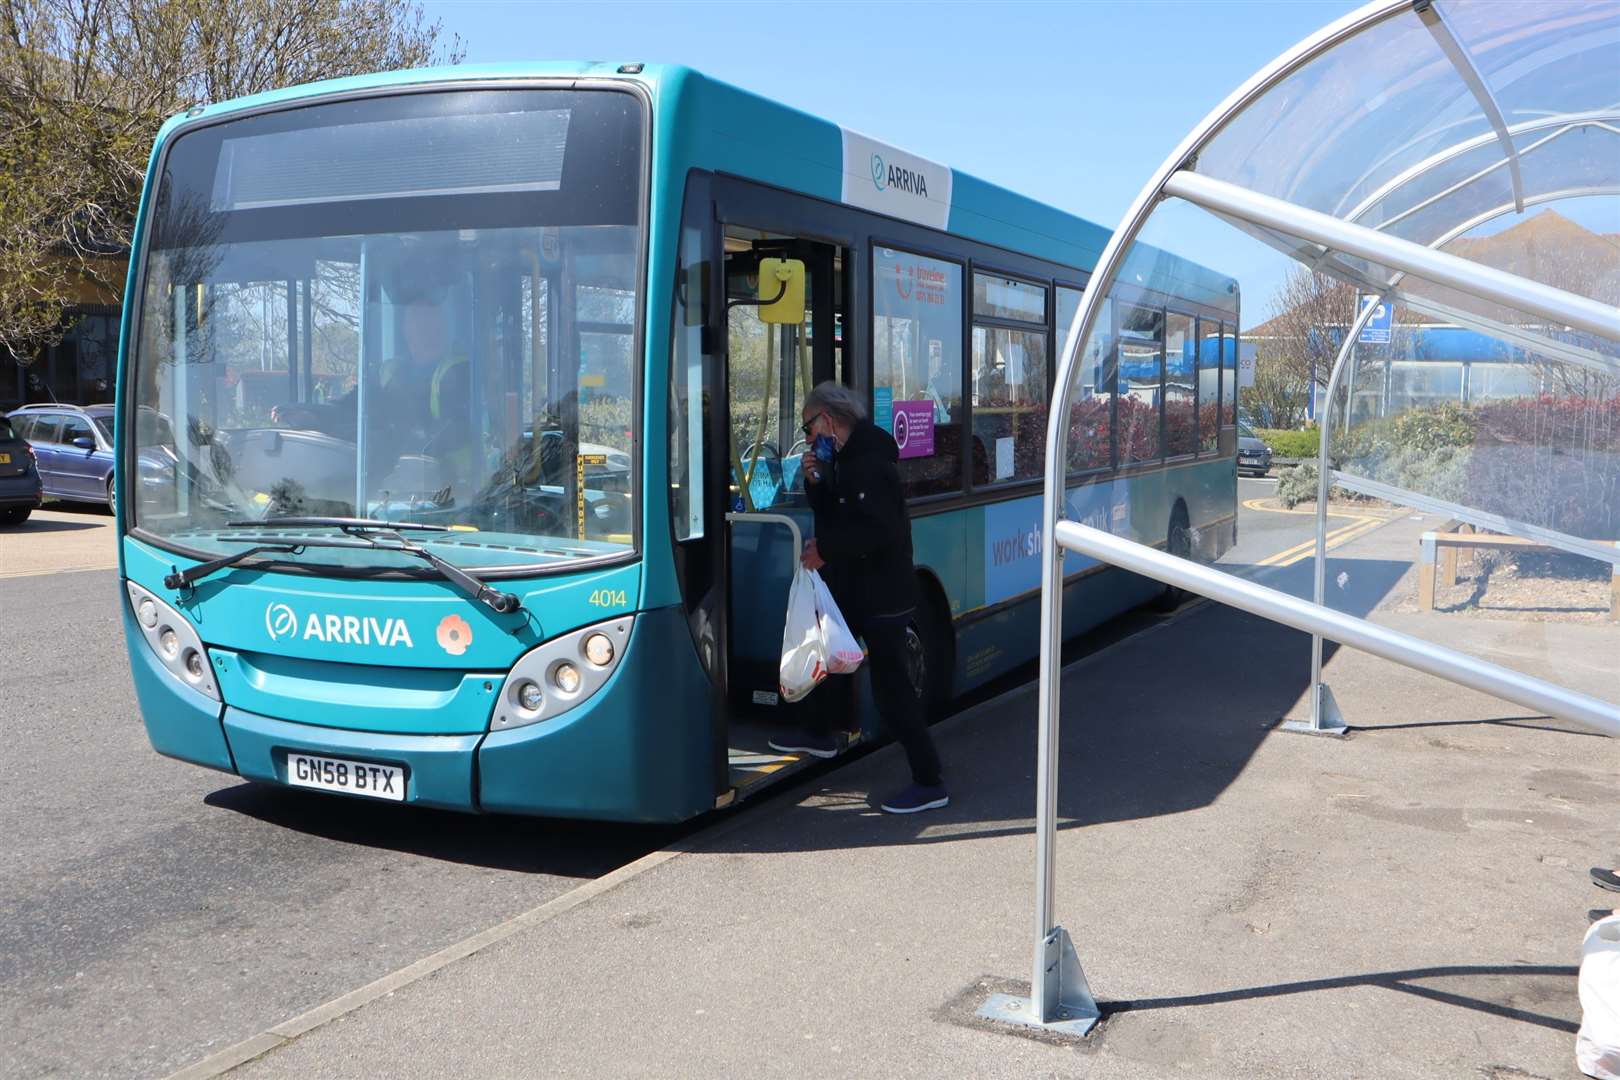 Out with the old - Arriva's blue buses will give way to Chalkwell's red fleet on Sheppey in July